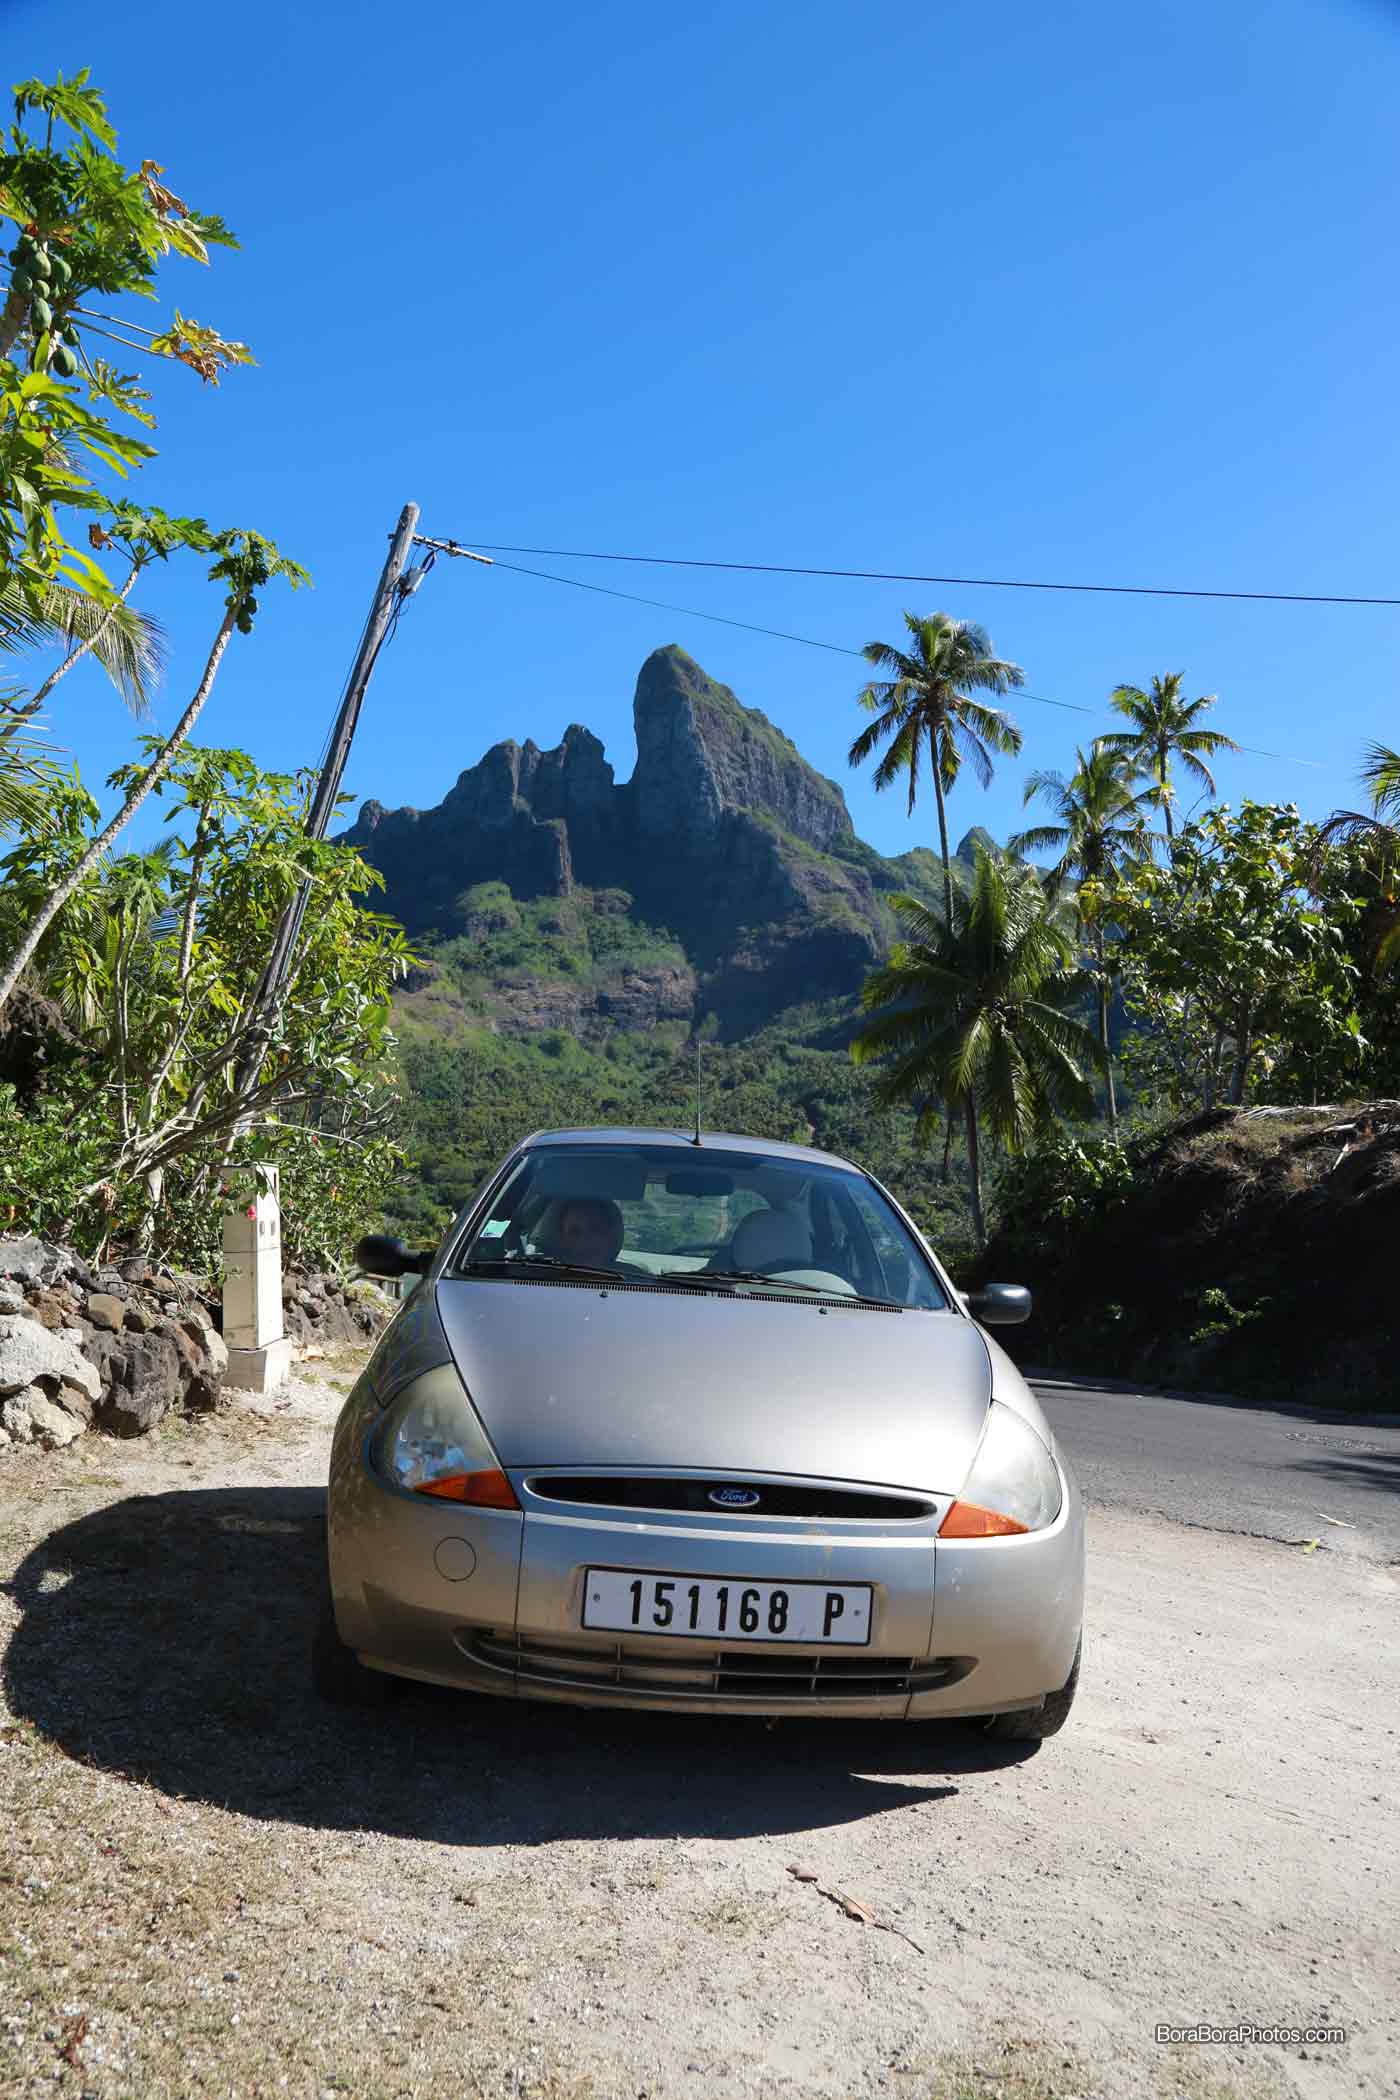 Picture of a car in Bora Bora with a view of Mt. Otemanu in the background.